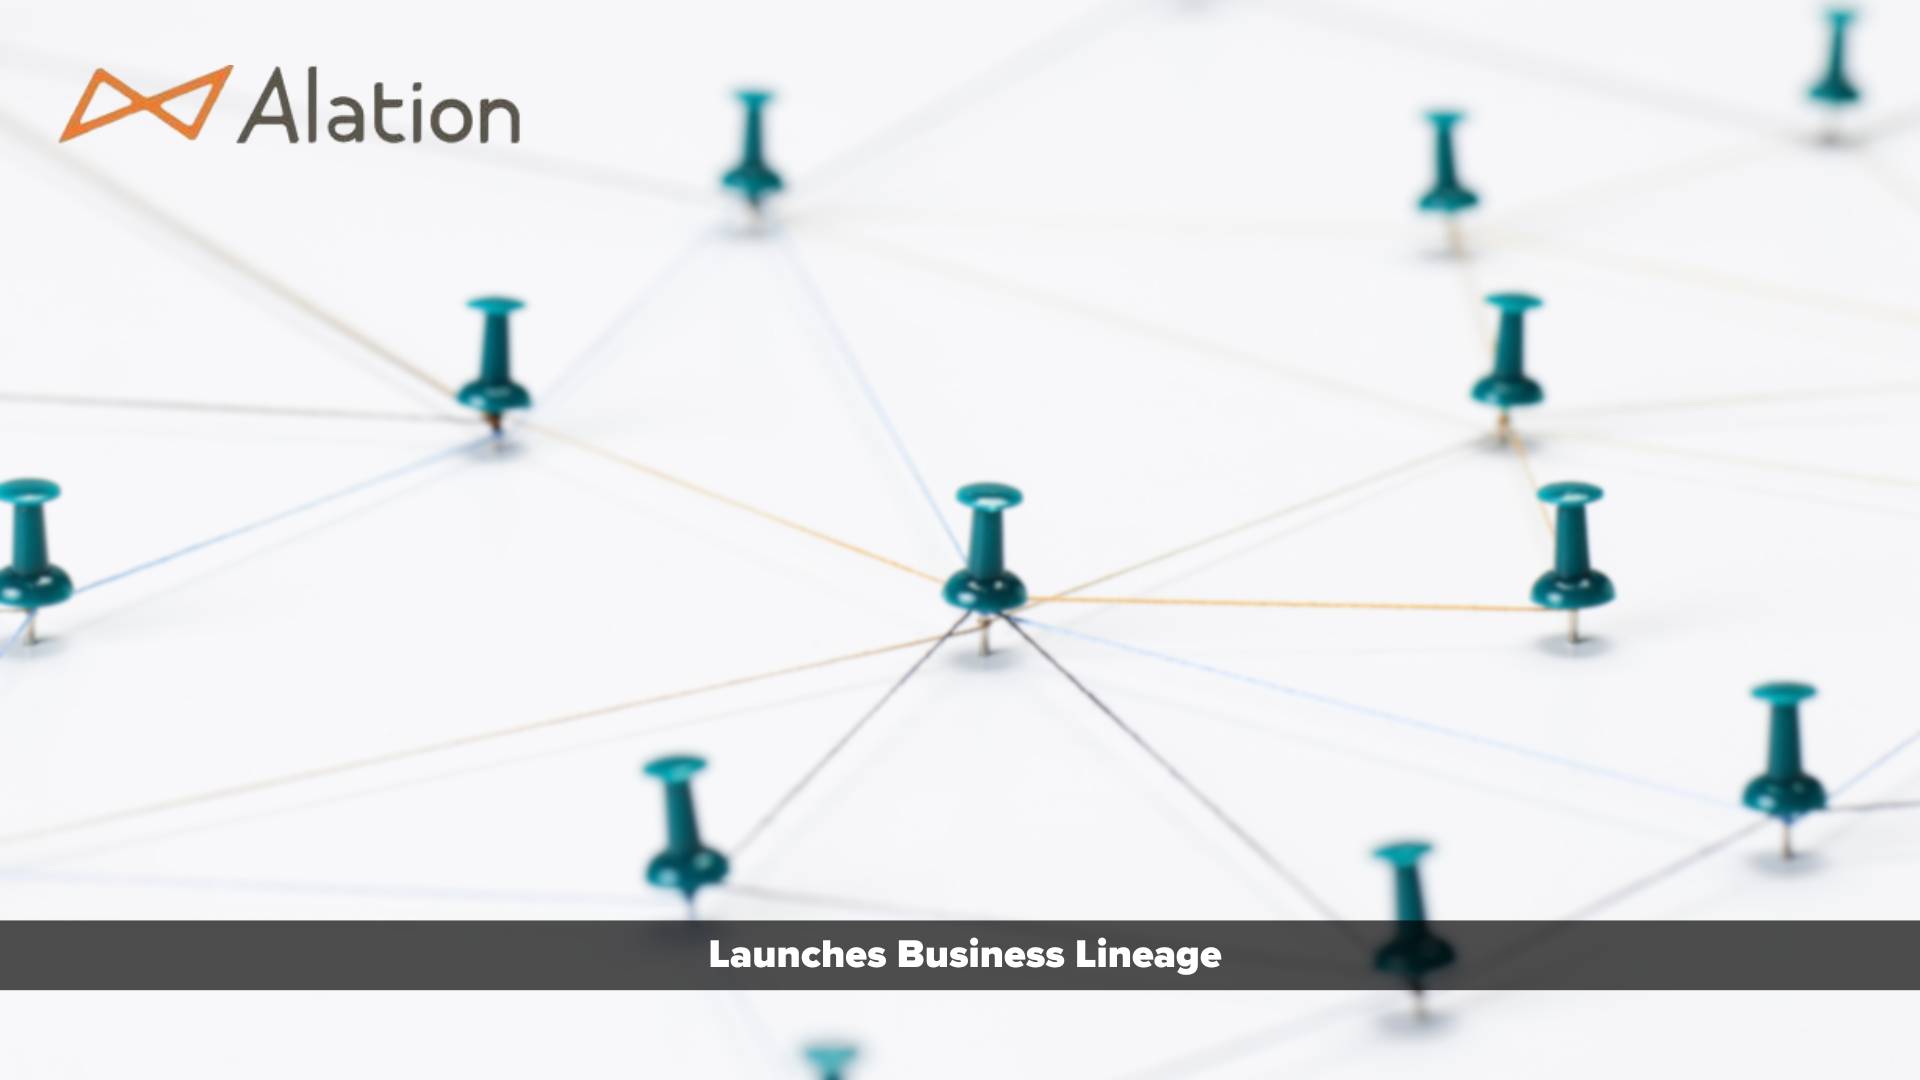 Alation Launches Business Lineage to Help Analytics Teams Increase Trust in Data and Accelerate Time to Insights